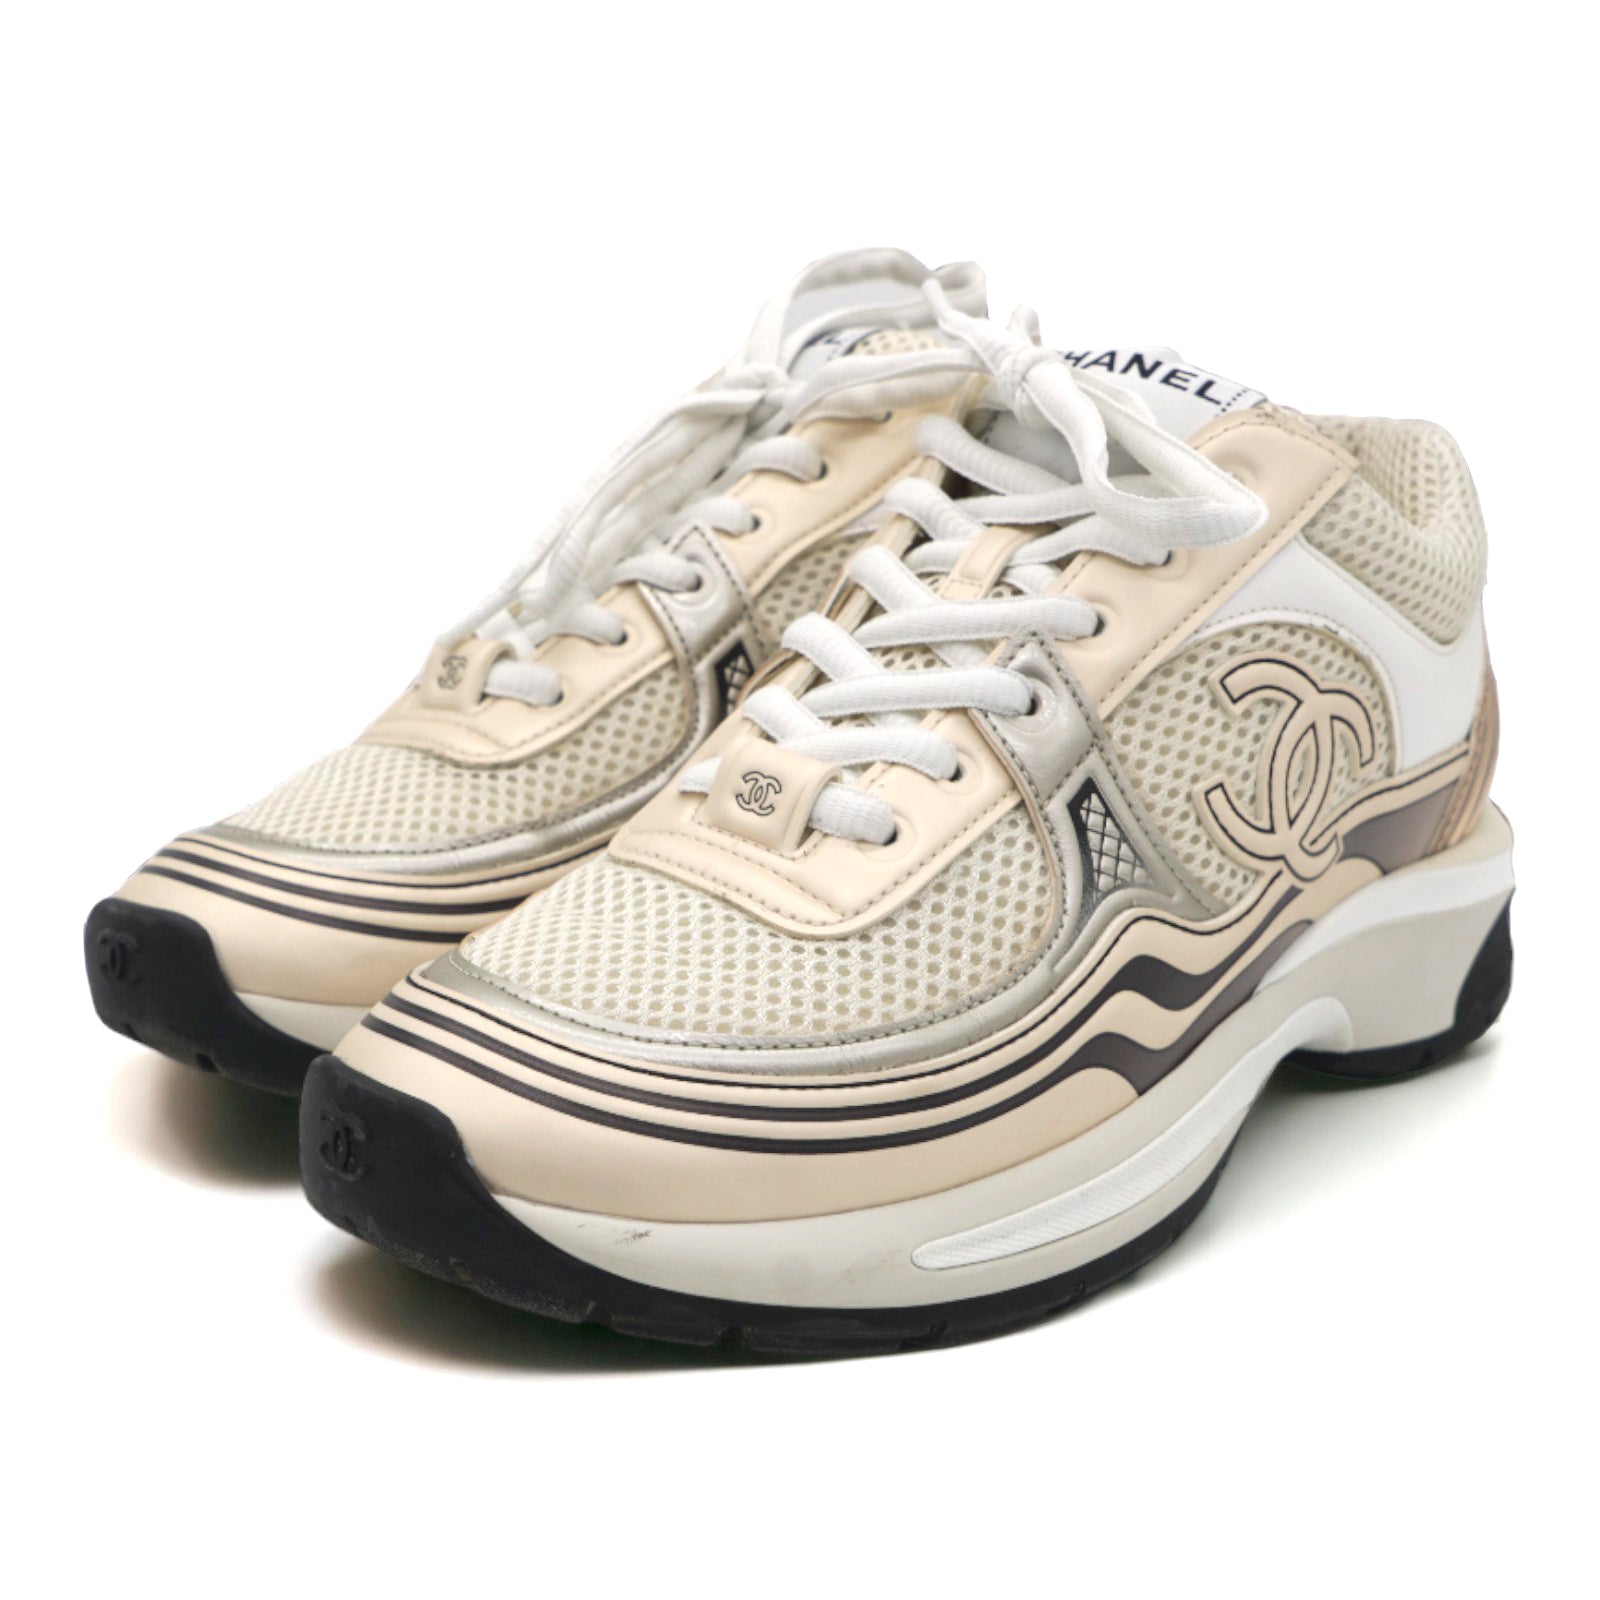 Laminated Leather and Fabric CC Low Top Ivory/White/Silver Sneakers 37